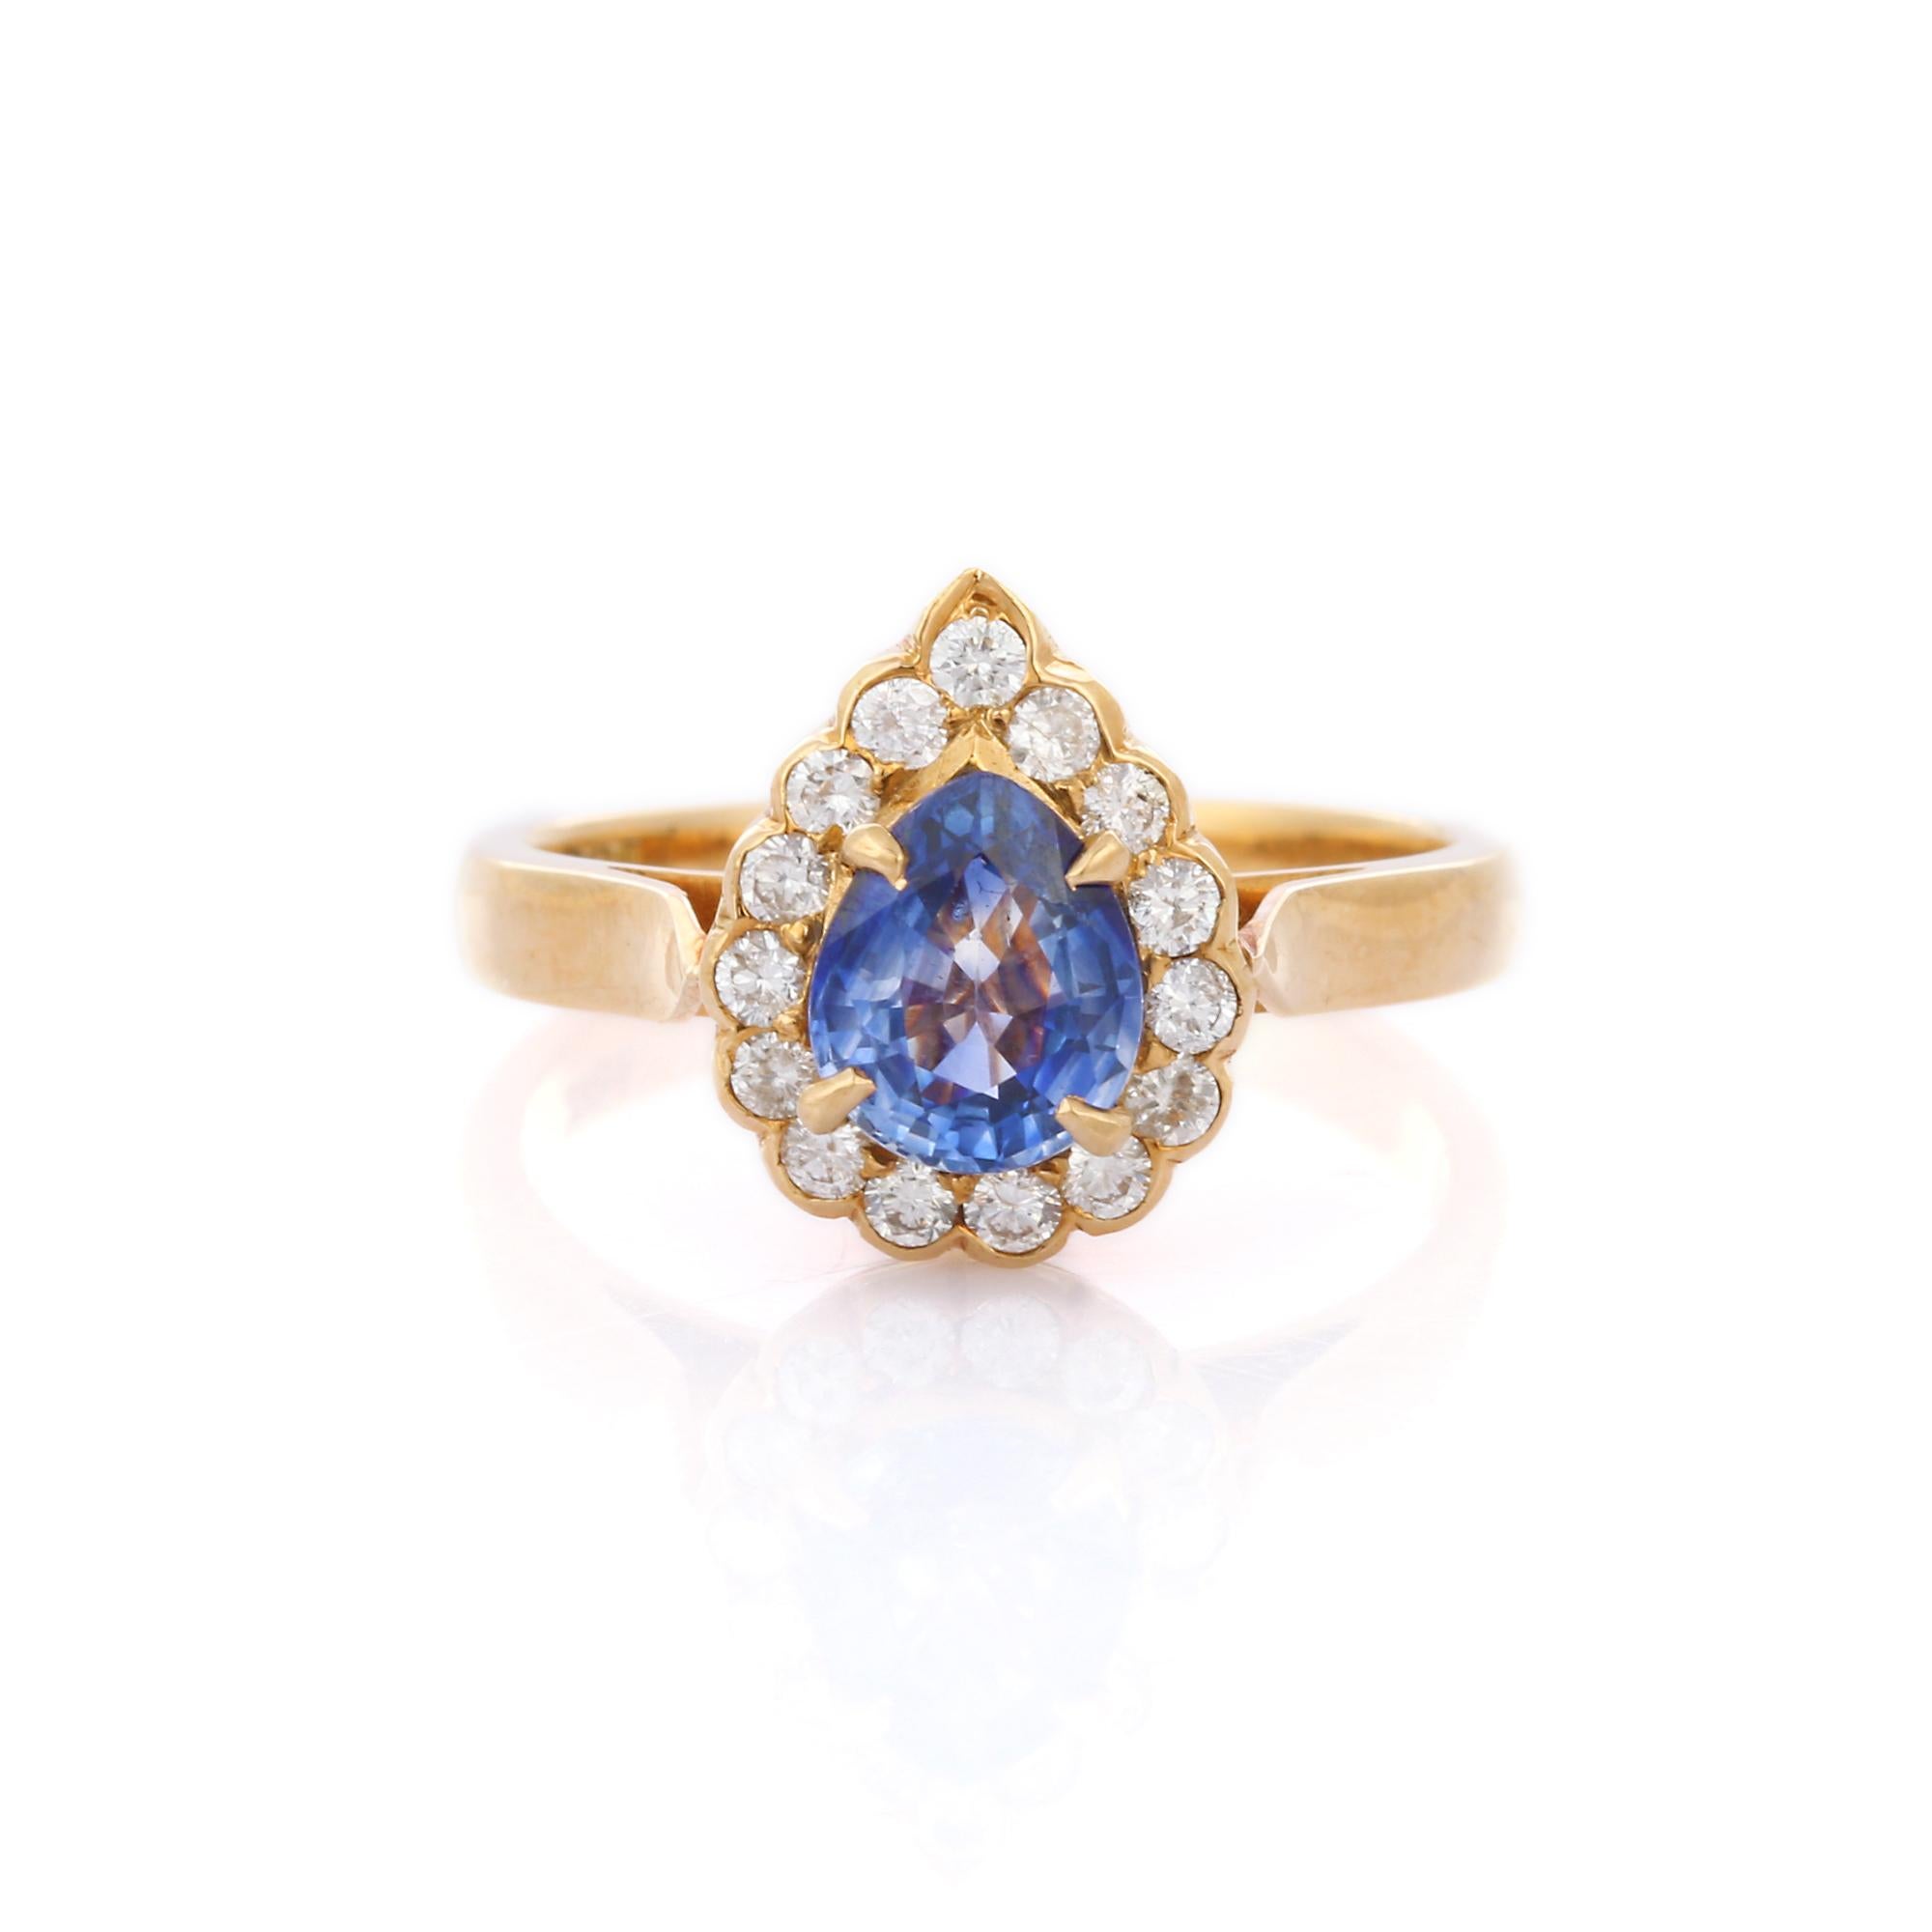 For Sale:  Pear Cut Blue Sapphire Ringed with Diamonds Engagement Ring in 18K Yellow Gold 2